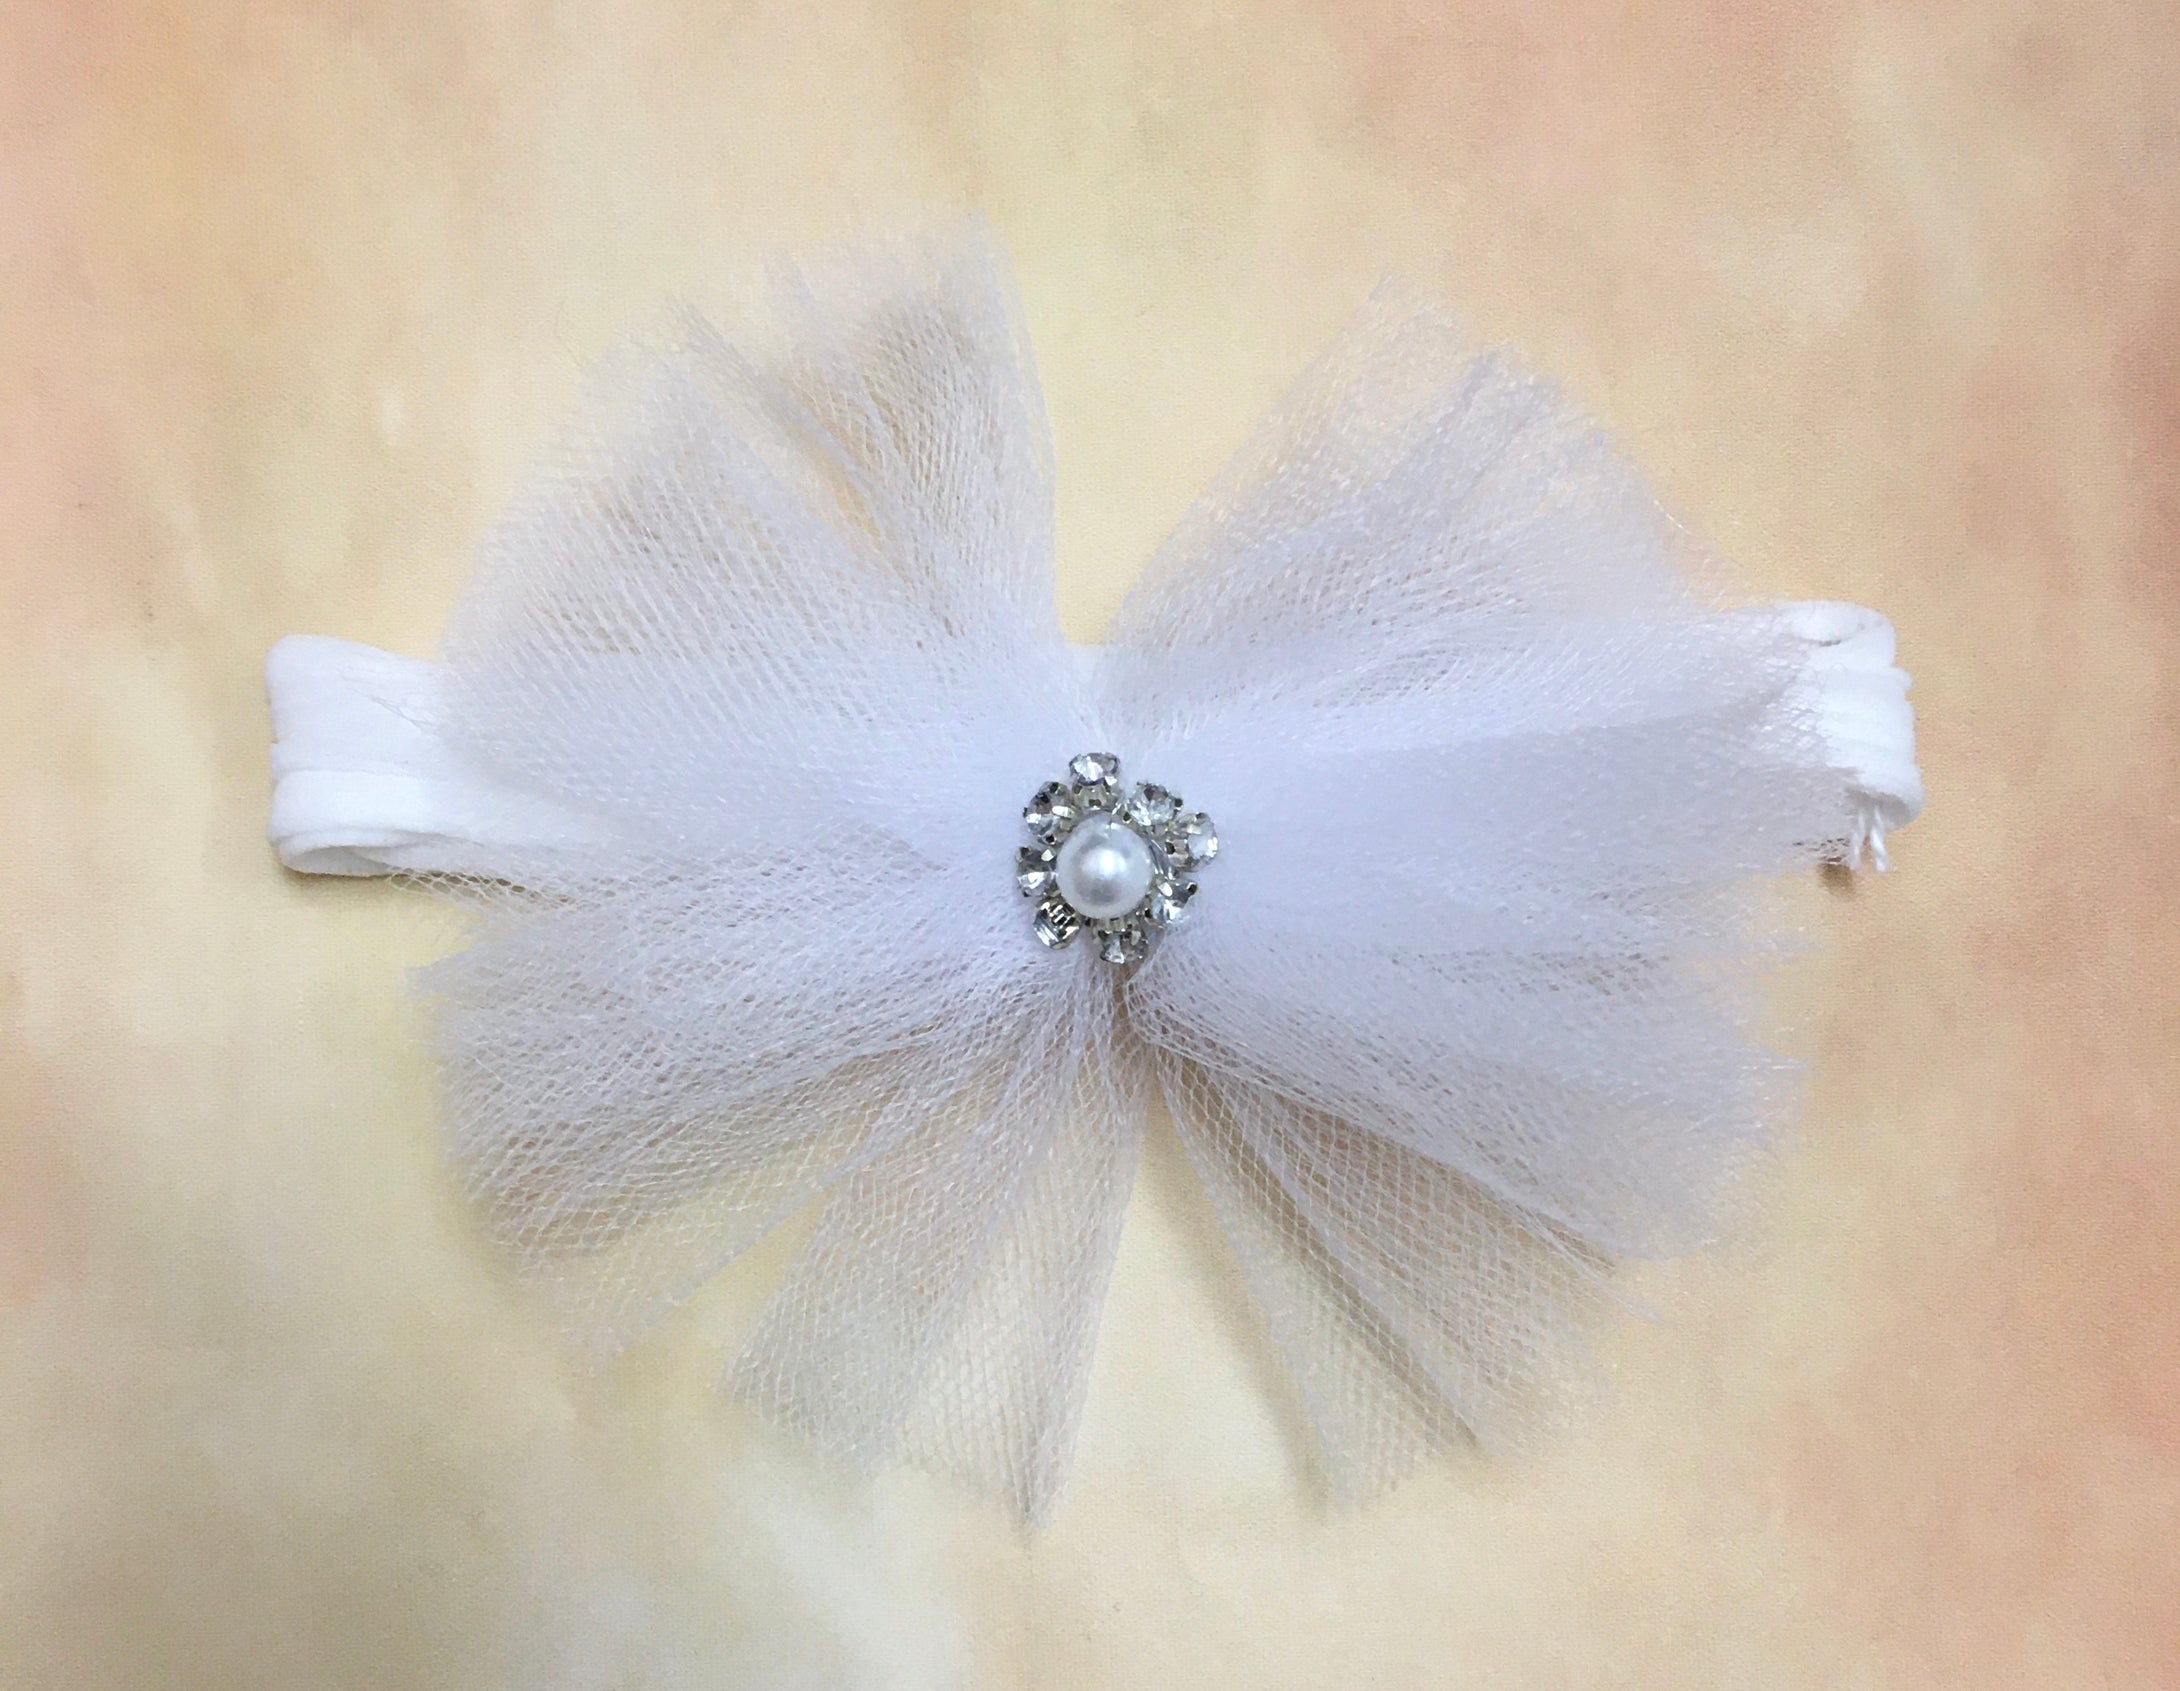 BW1 Tulle headband with rhinestone pearl center on stocking stretch band-Nenes Lullaby Boutique Inc-Nenes Lullaby Boutique Inc